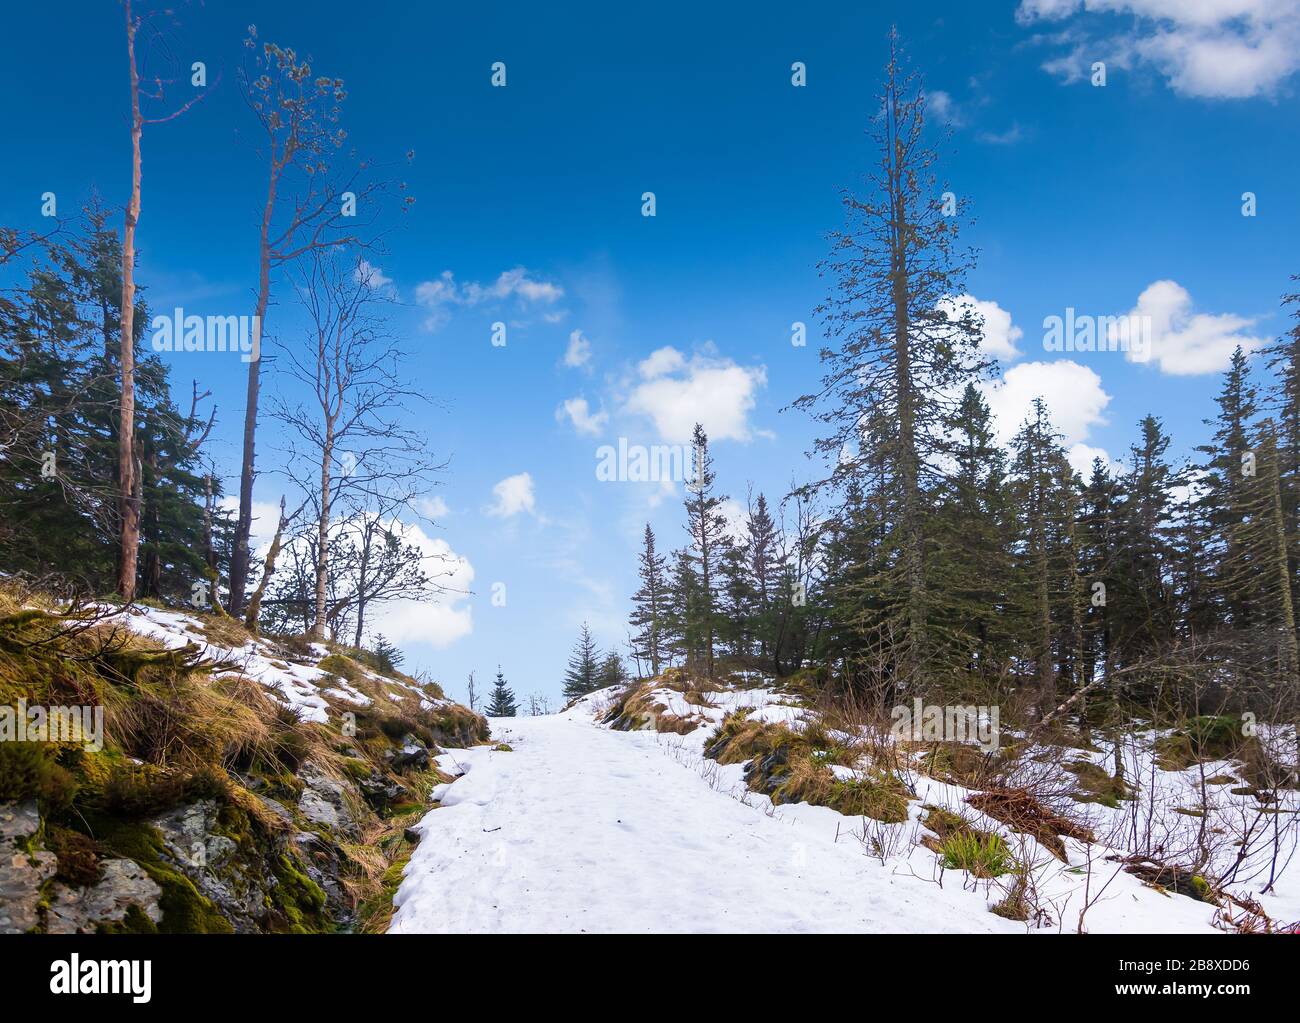 Bergen Mt Floyen, Norway. Forest snow landscape with hiking trail in winter. Stock Photo